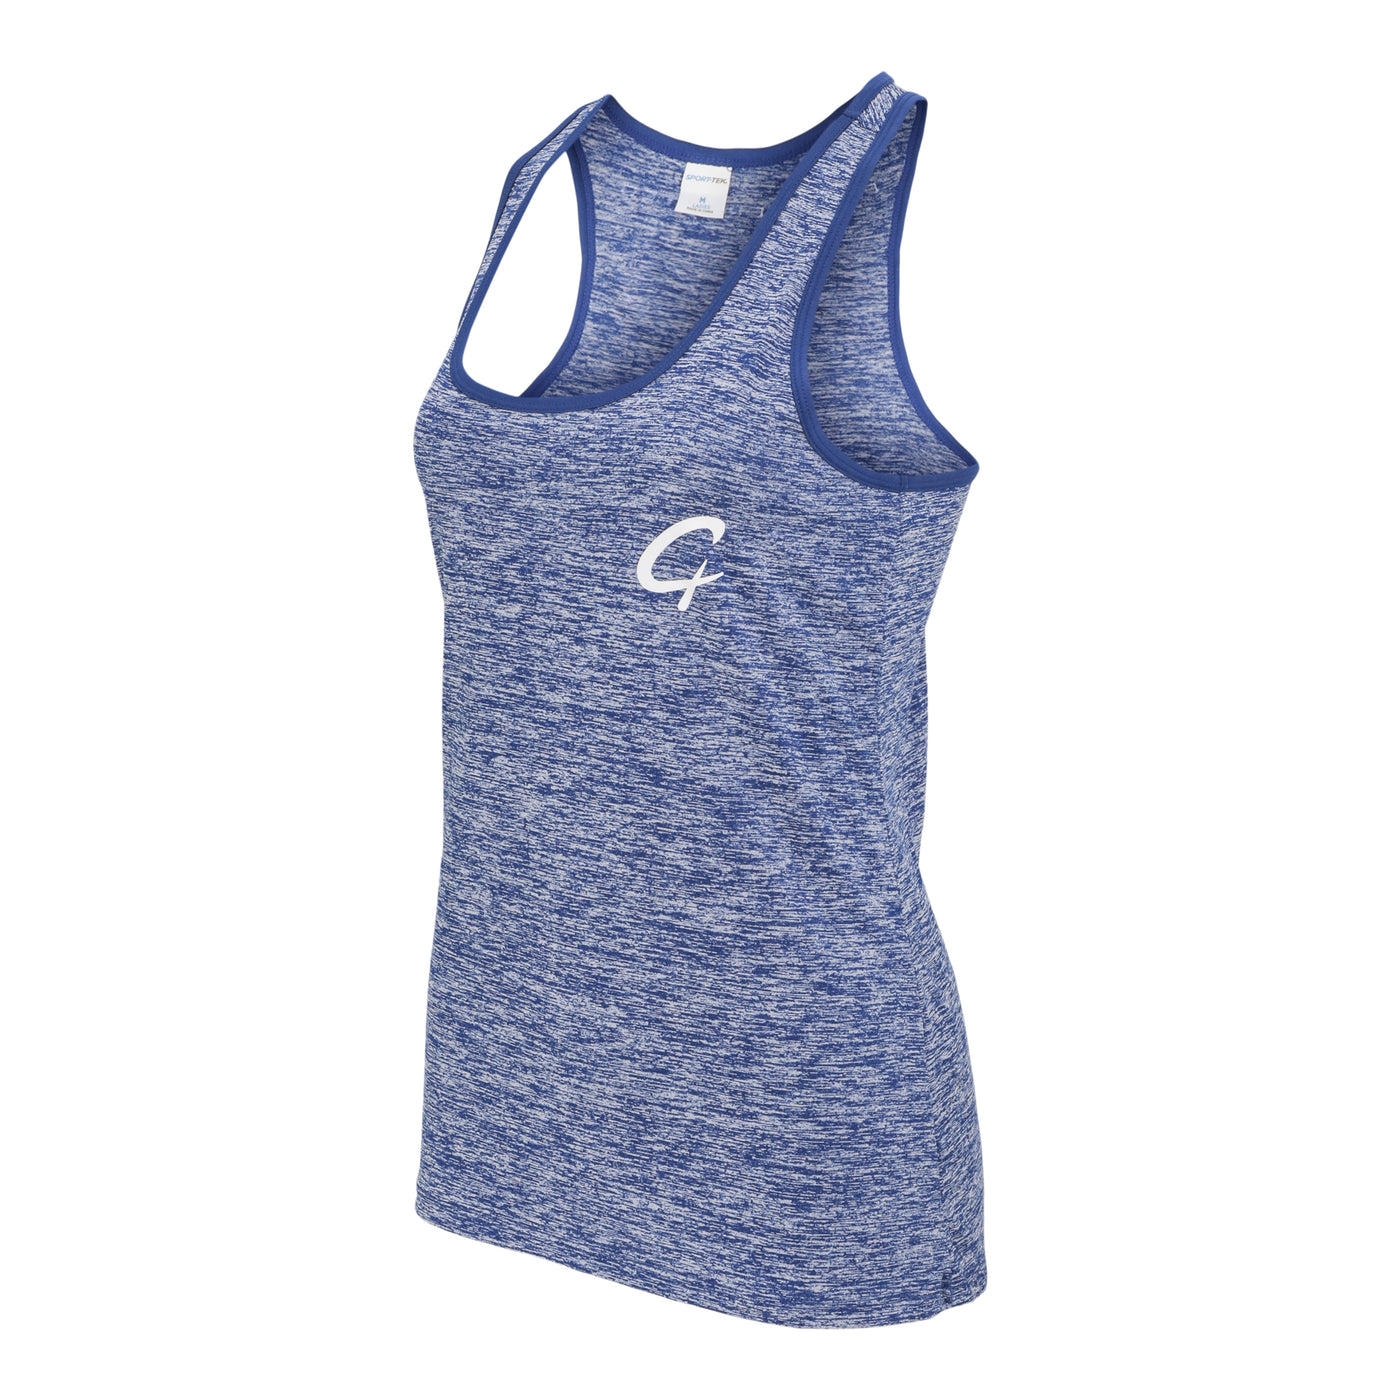 Created Women's Charged ice blue tank top diagonal view